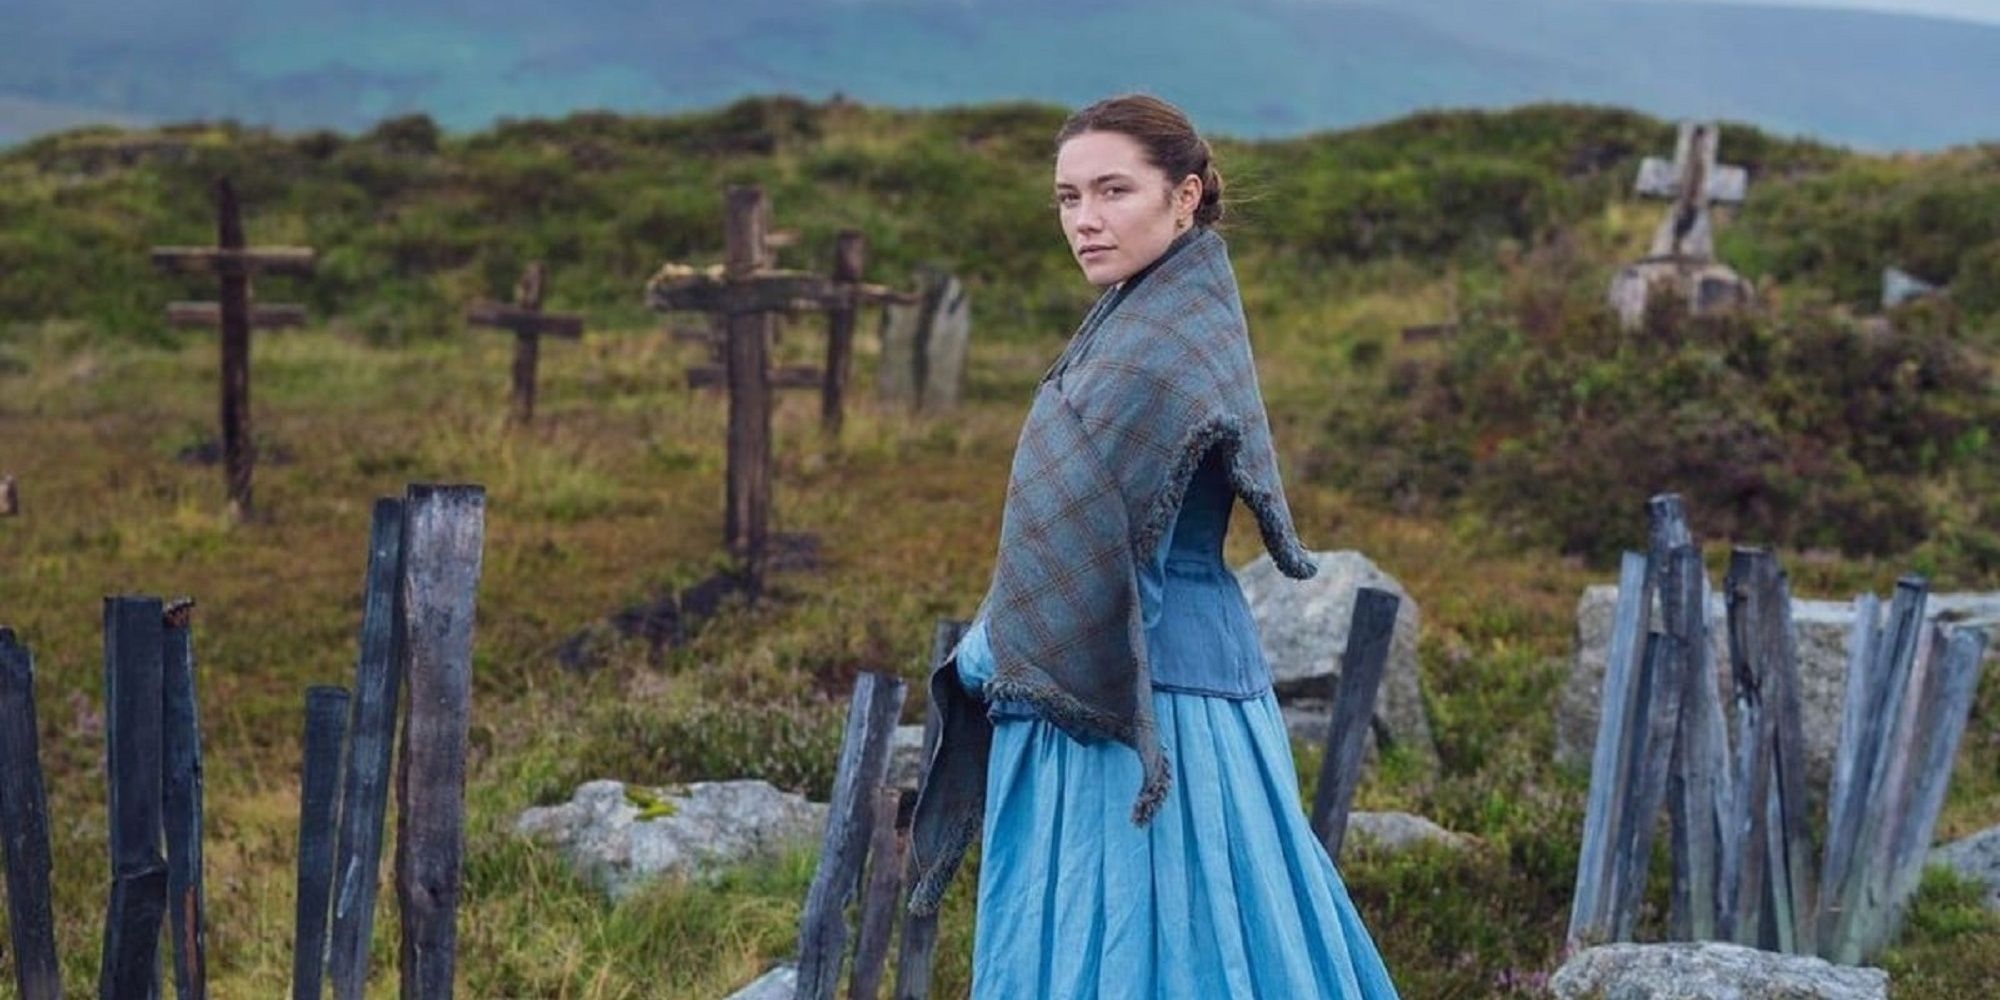 Florence Pugh as Lib, wearing a bright blue dress and standing in a graveyard in 'The Wonder.'